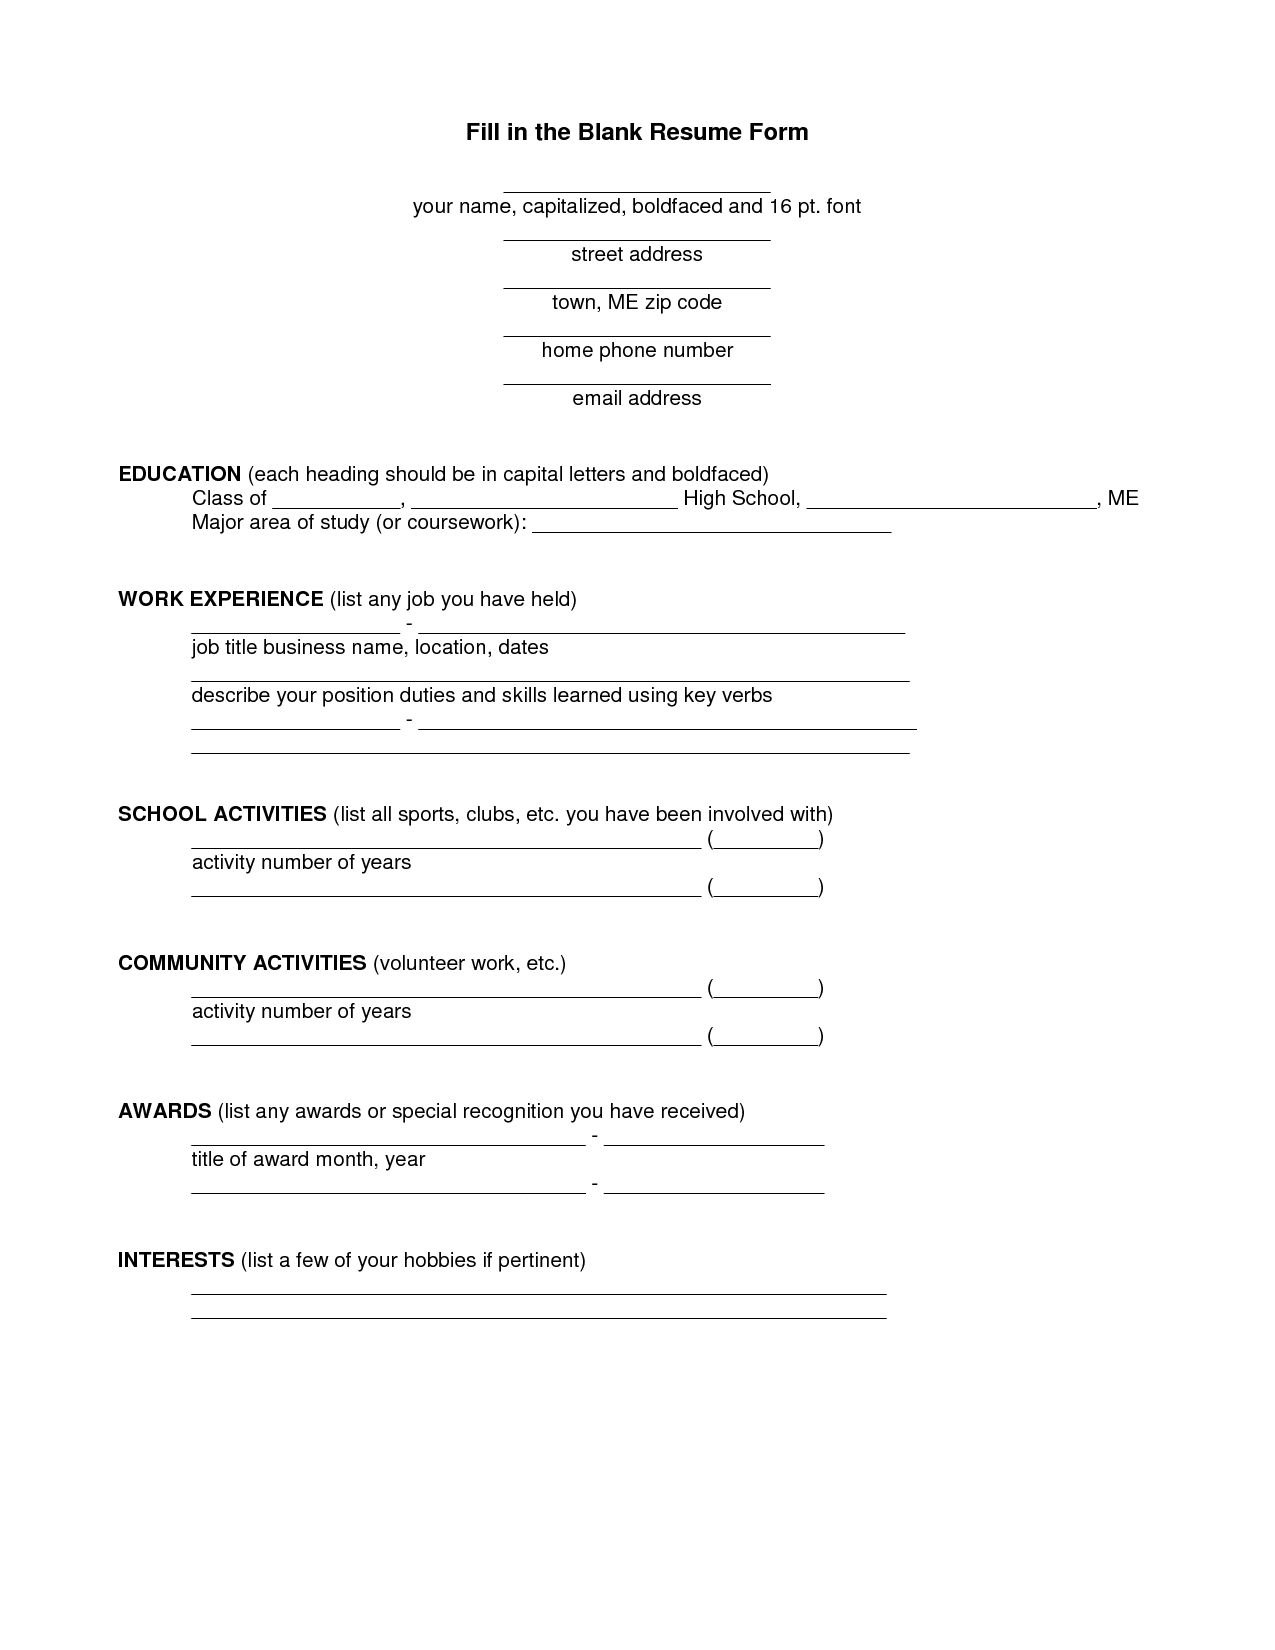 Free Printable Fill in Blank Resume Template